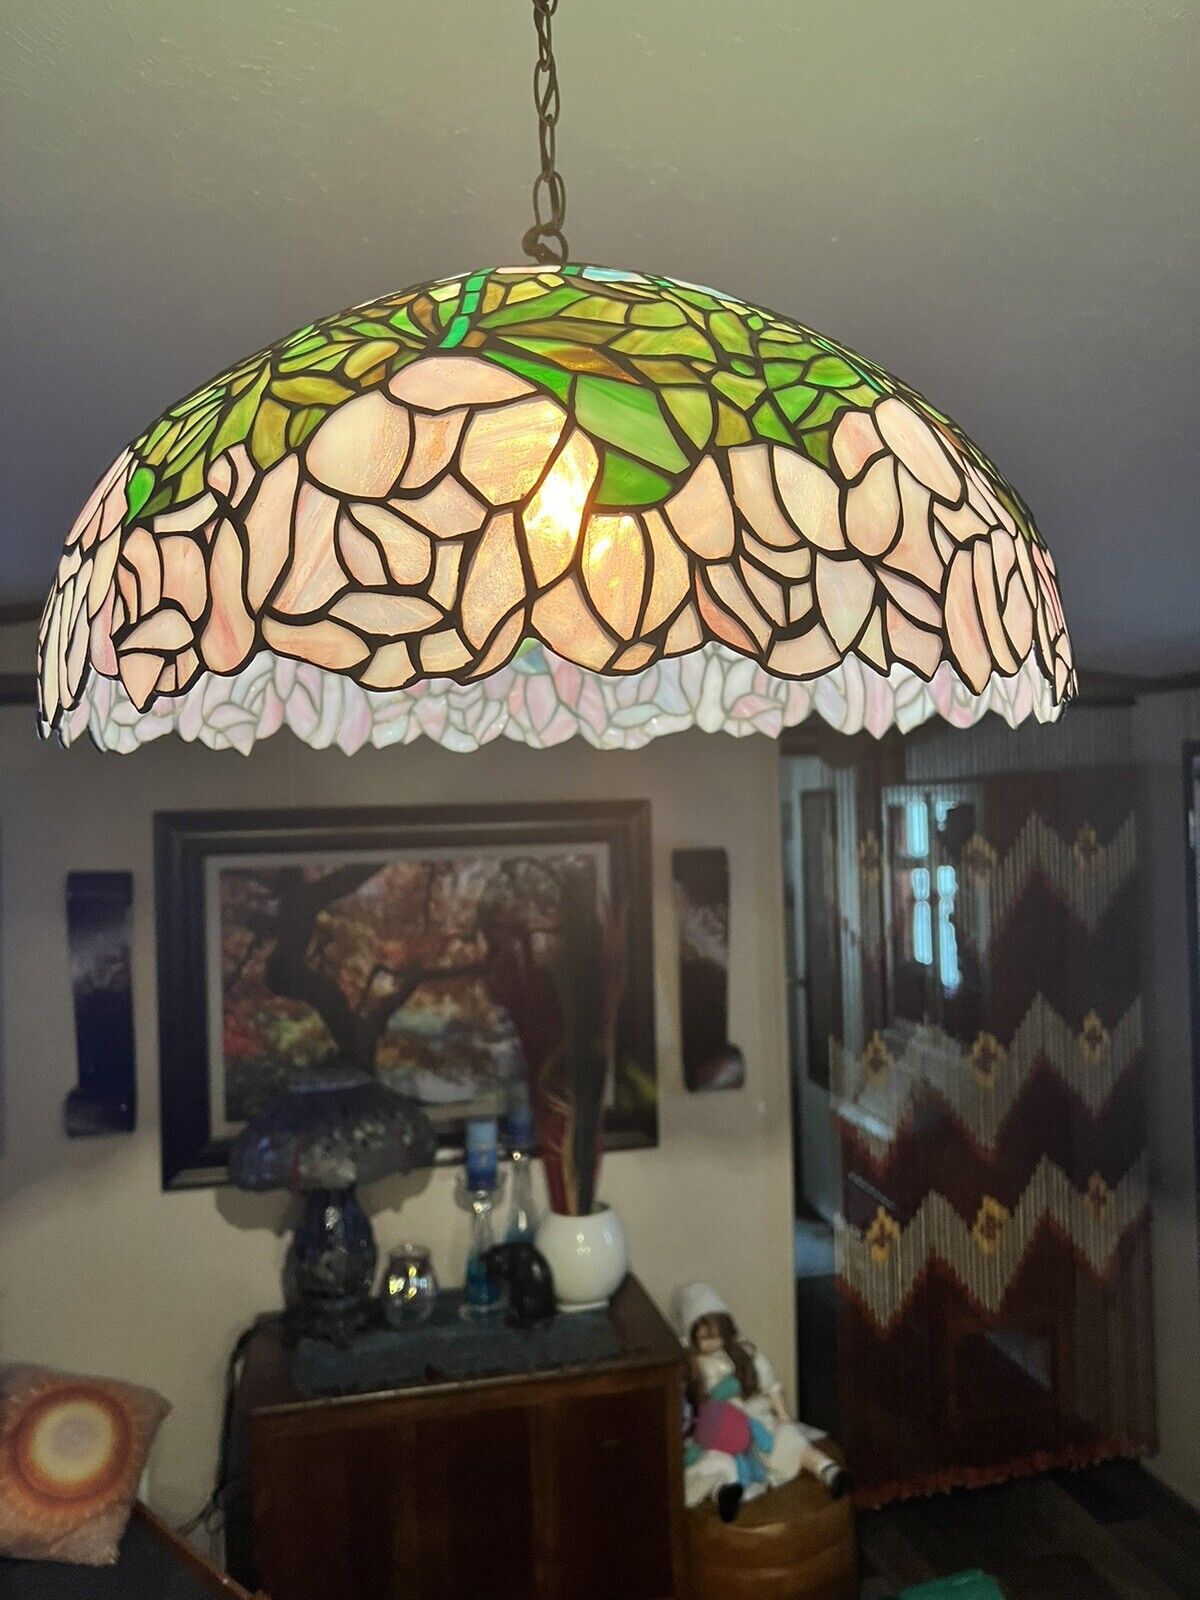 22” Cabbage Rose Tiffany Style Lamp Shade -Requires Wiring Into Ceiling.